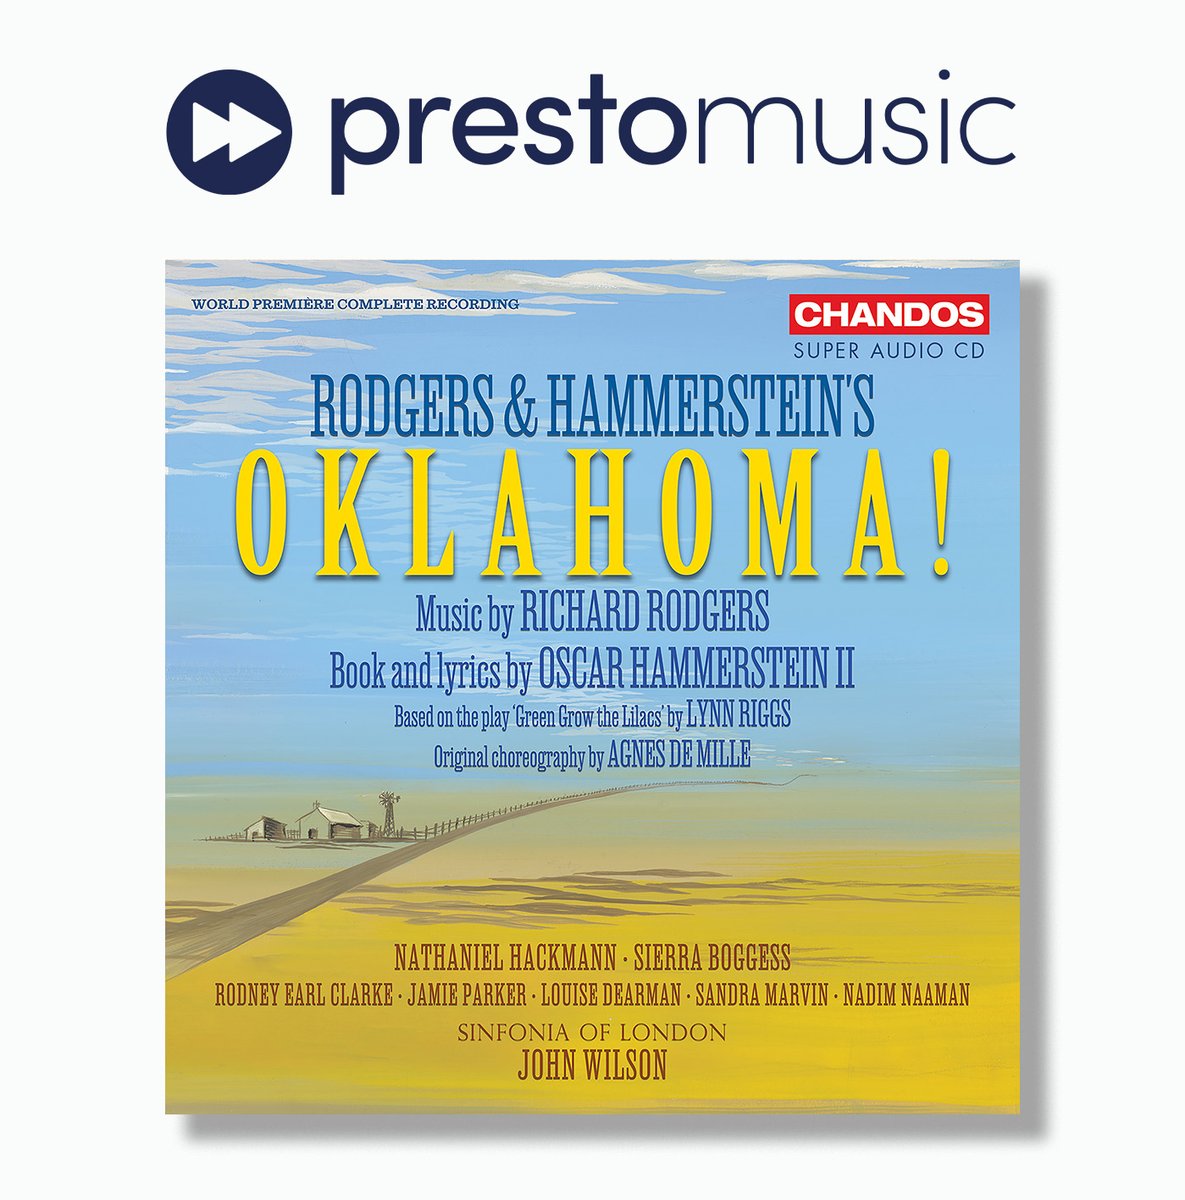 '...it's one hundred minutes of non-stop delight.' 'Oklahoma!' from @SinfoniaOfLondn and John Wilson is Classical Recording of the Week @PrestoMusicCom 🤠⭐ Read the review 📰tinyurl.com/5n7cd3vj Album available now! 🔗lnk.to/OklahomascoreTW